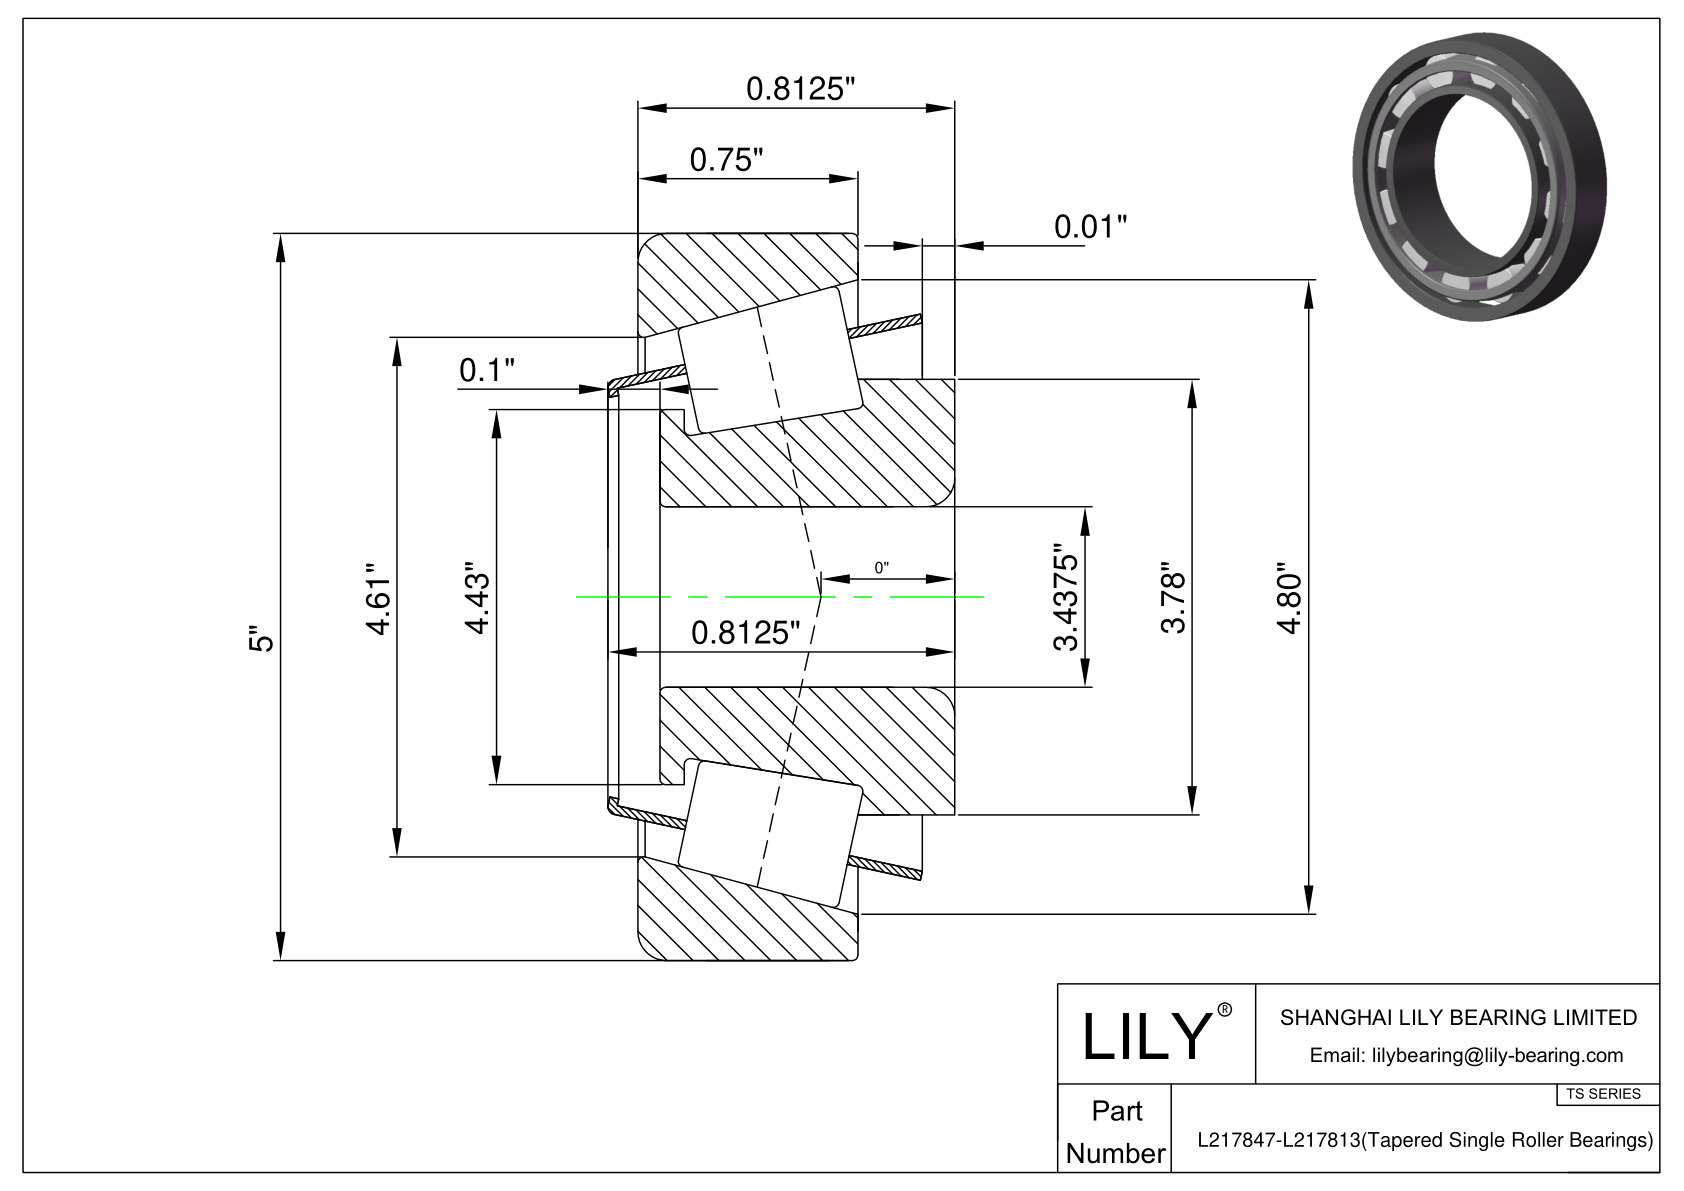 L217847-L217813 TS (Tapered Single Roller Bearings) (Imperial) cad drawing